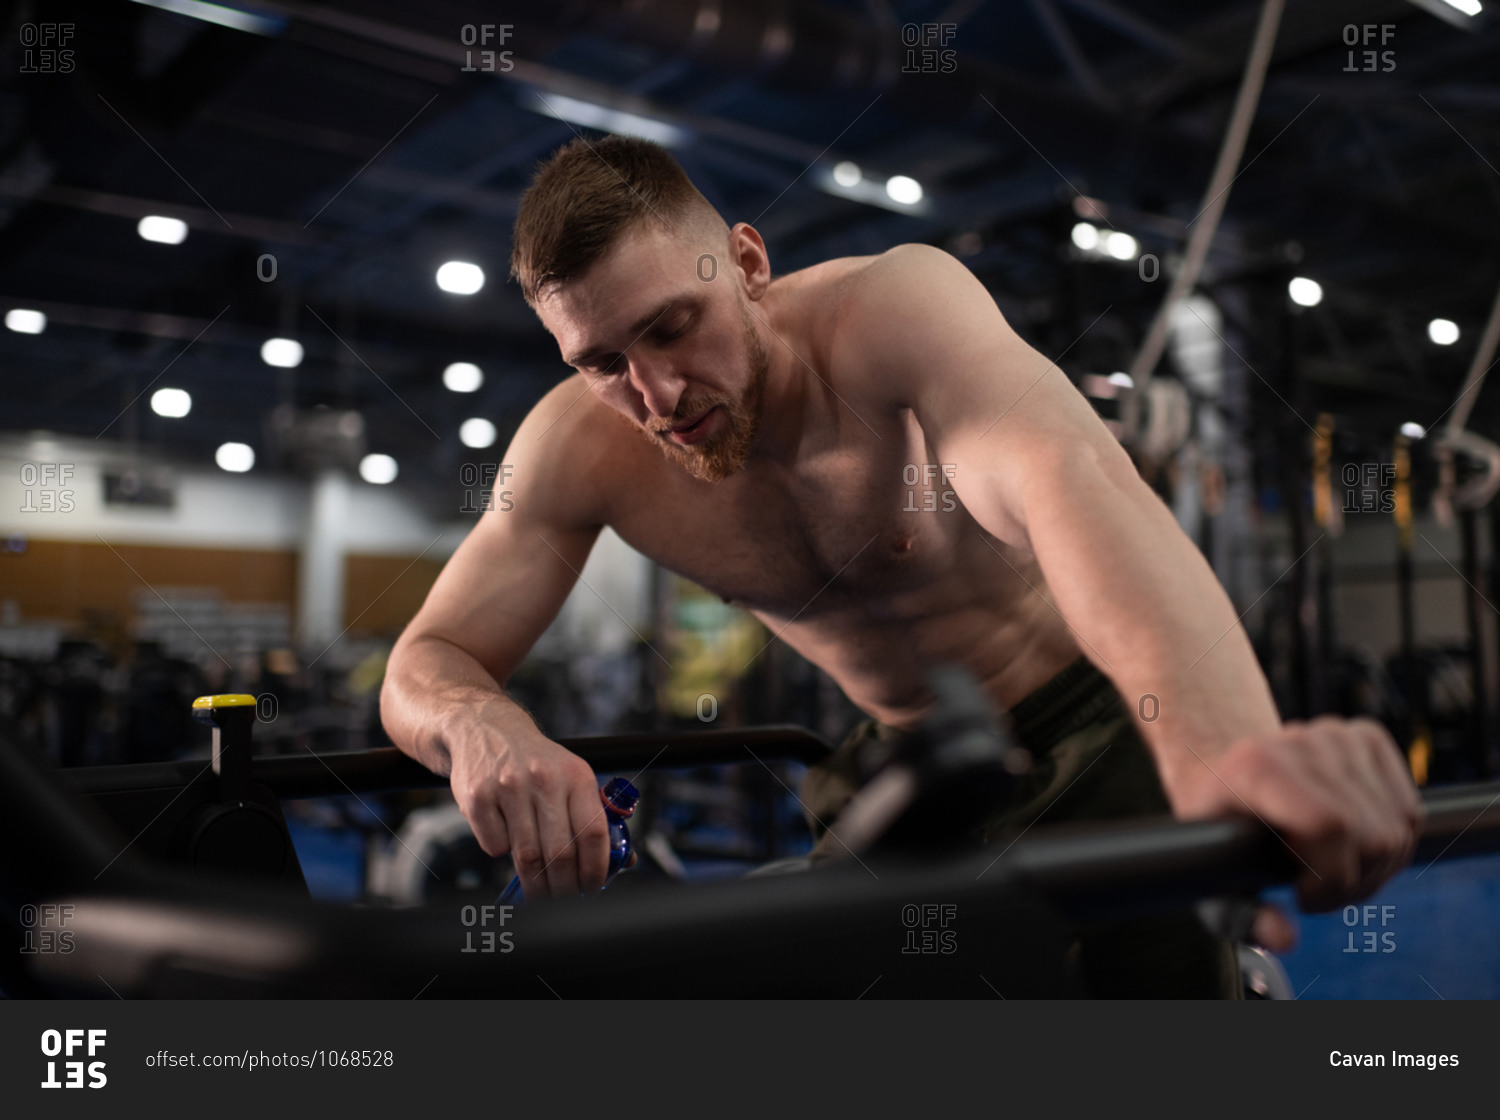 Exhausted sportsman resting on treadmill